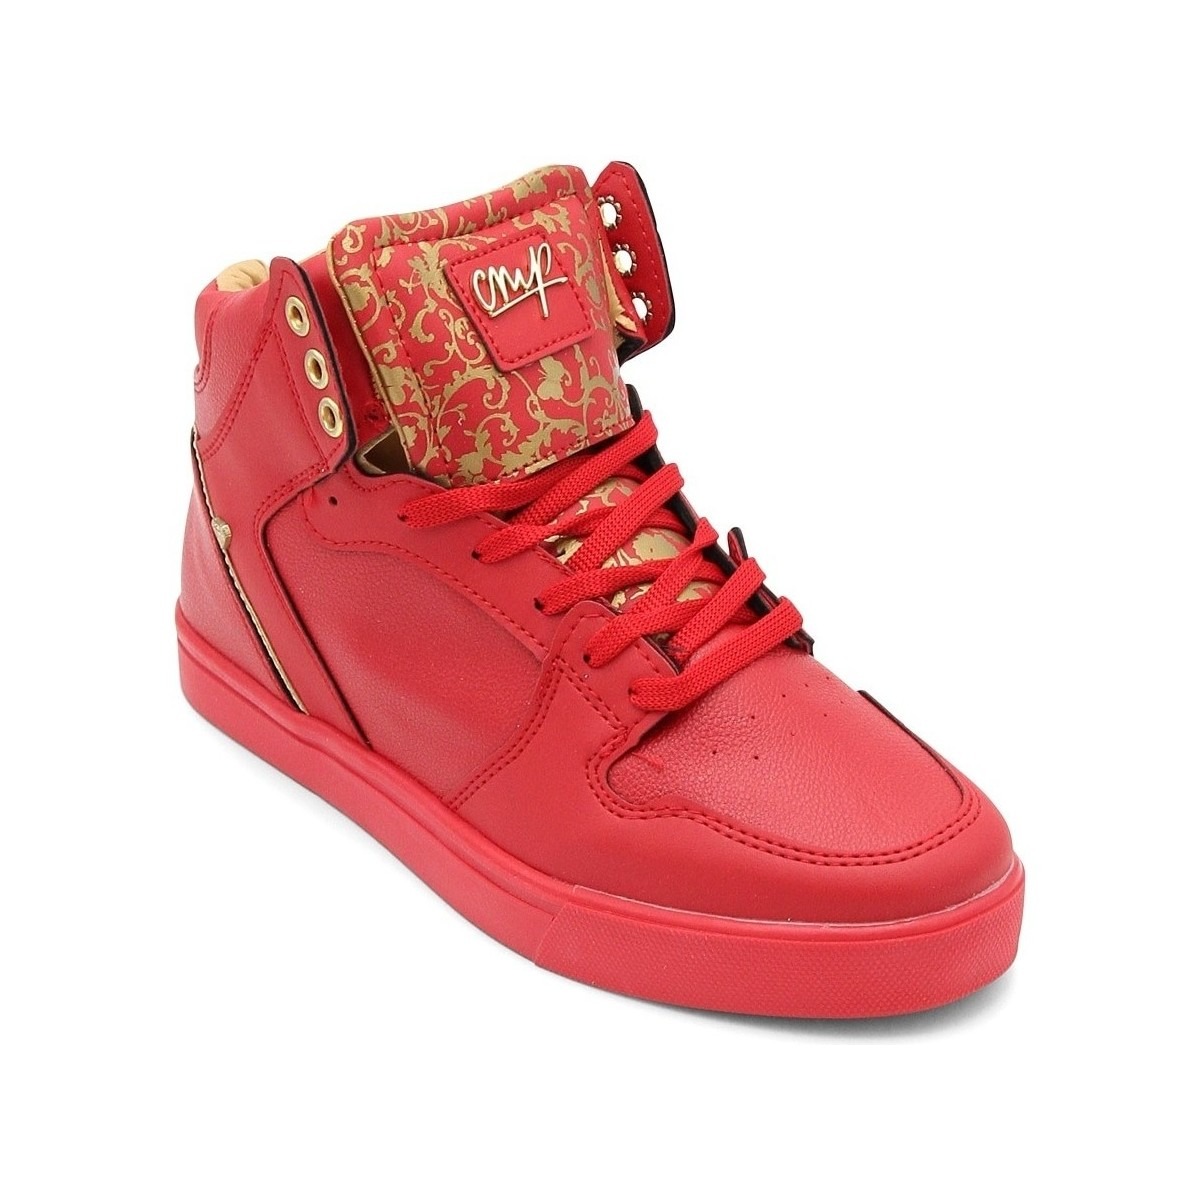 Cash Money Red Sneakers for Men from Spartoo GOOFASH